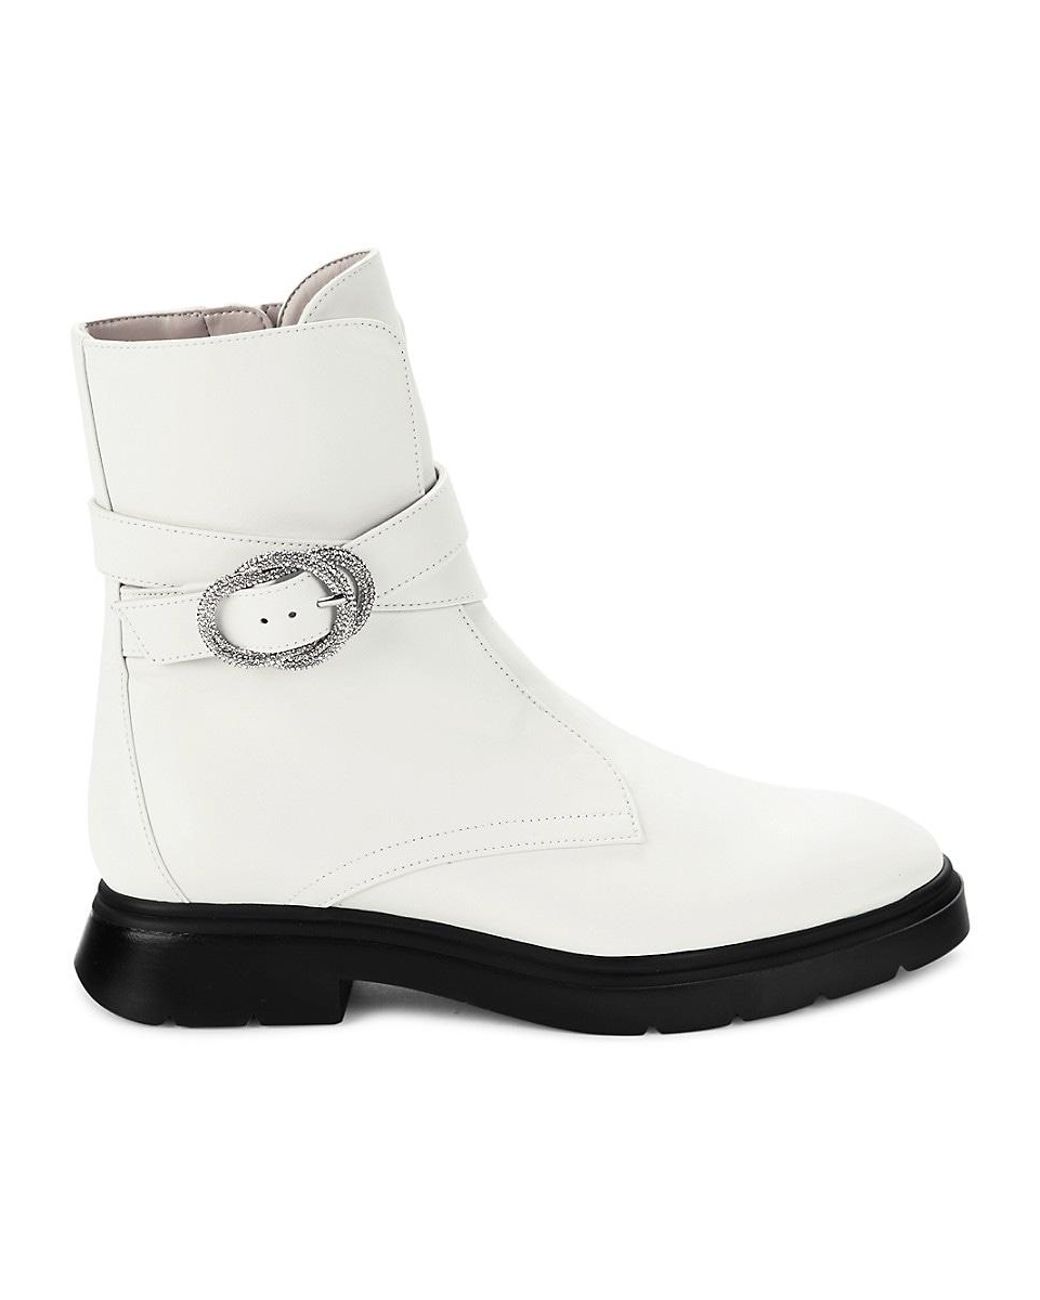 Stuart Weitzman Crystal Buckle Leather Ankle Boots in White | Lyst UK